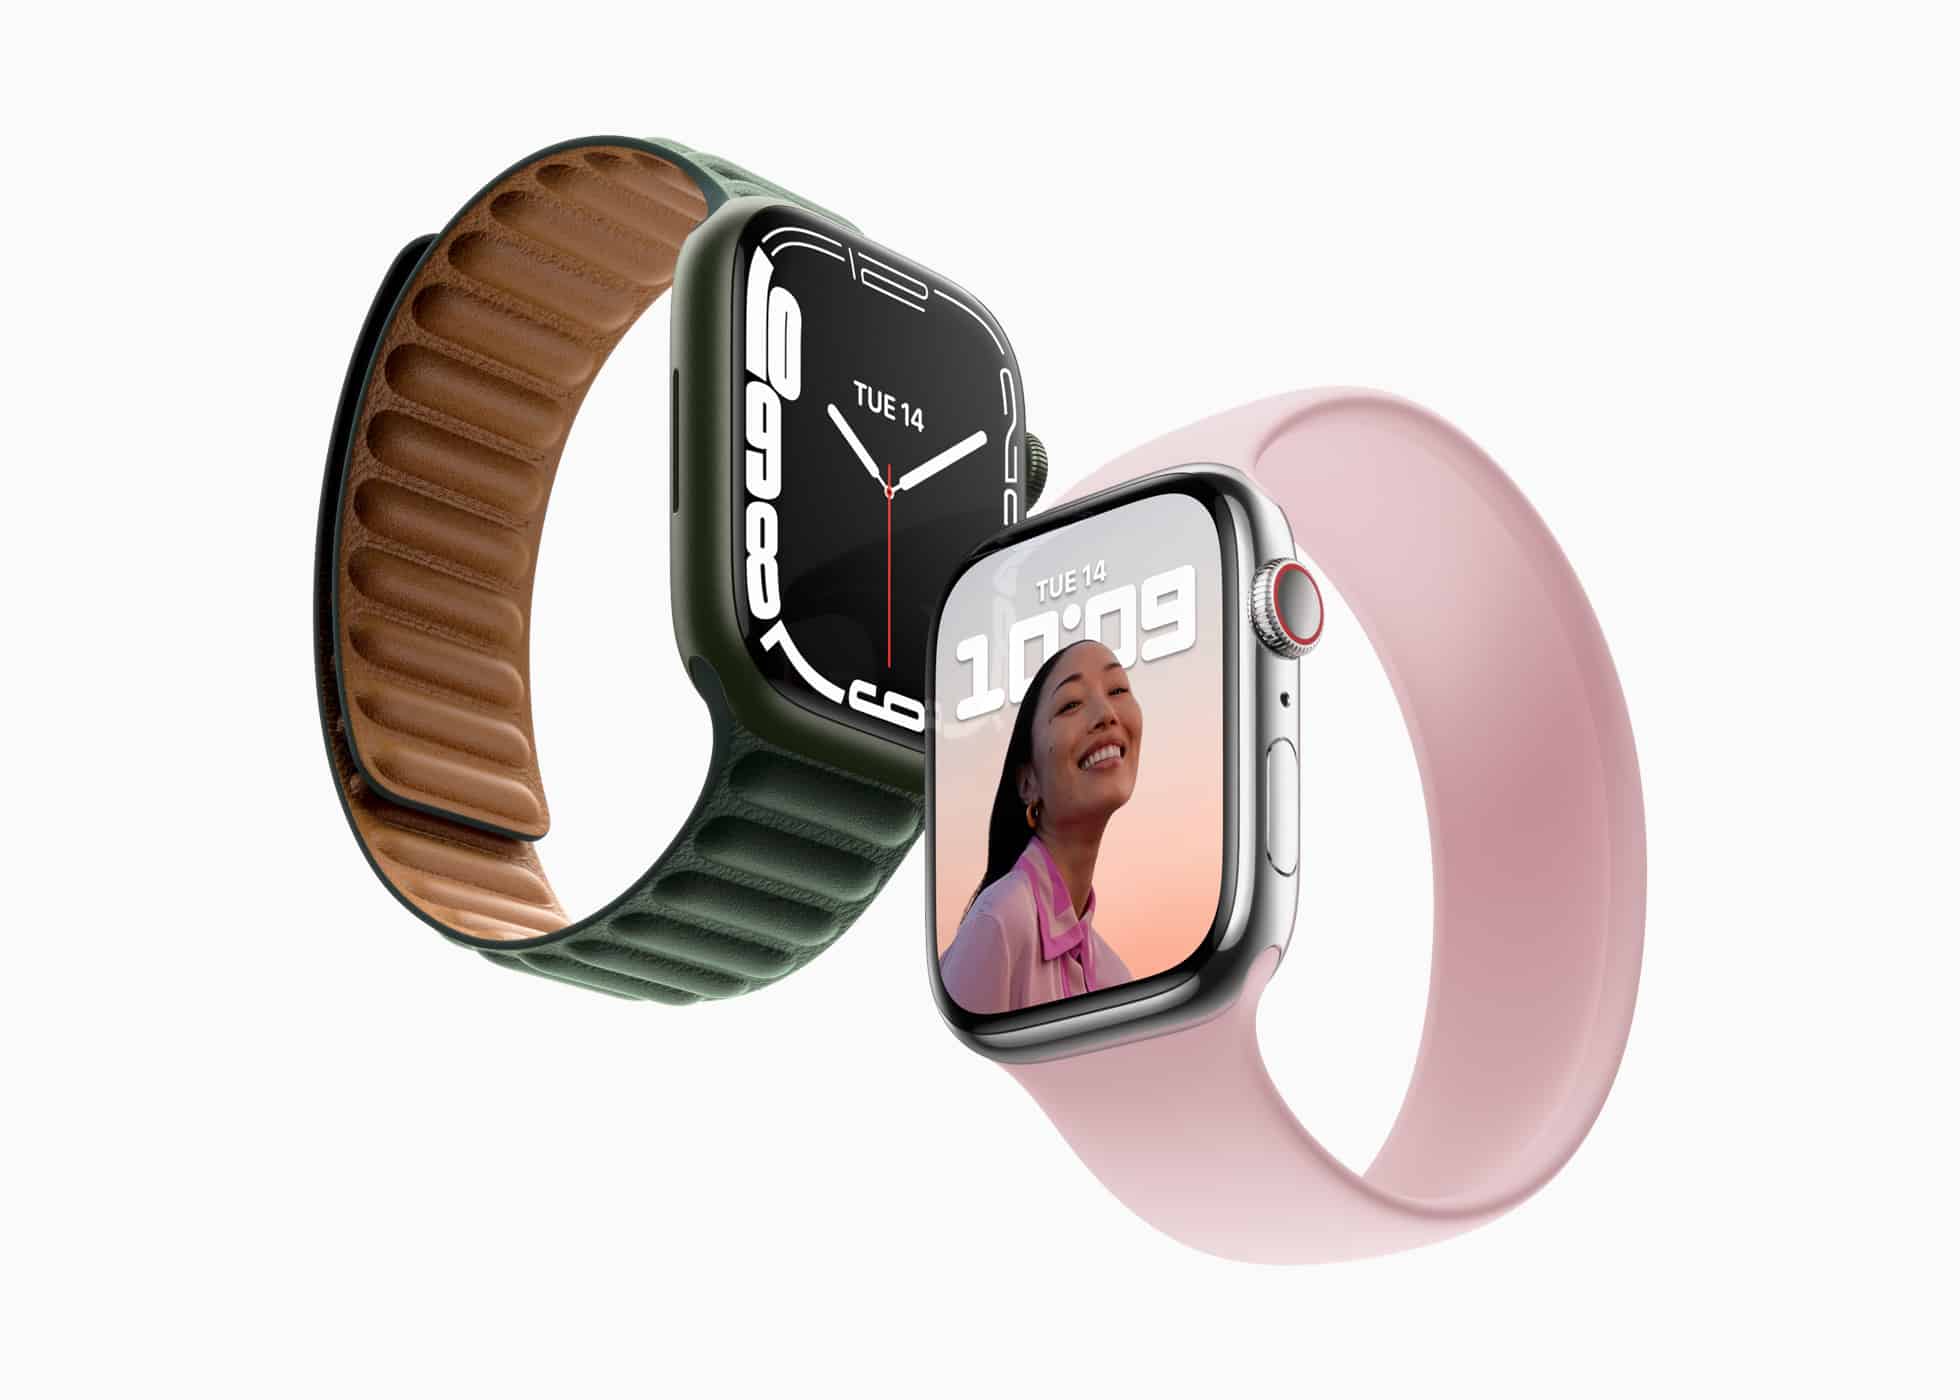 Apple announce the all-new Apple Watch Series 7 and upgrades to Fitness